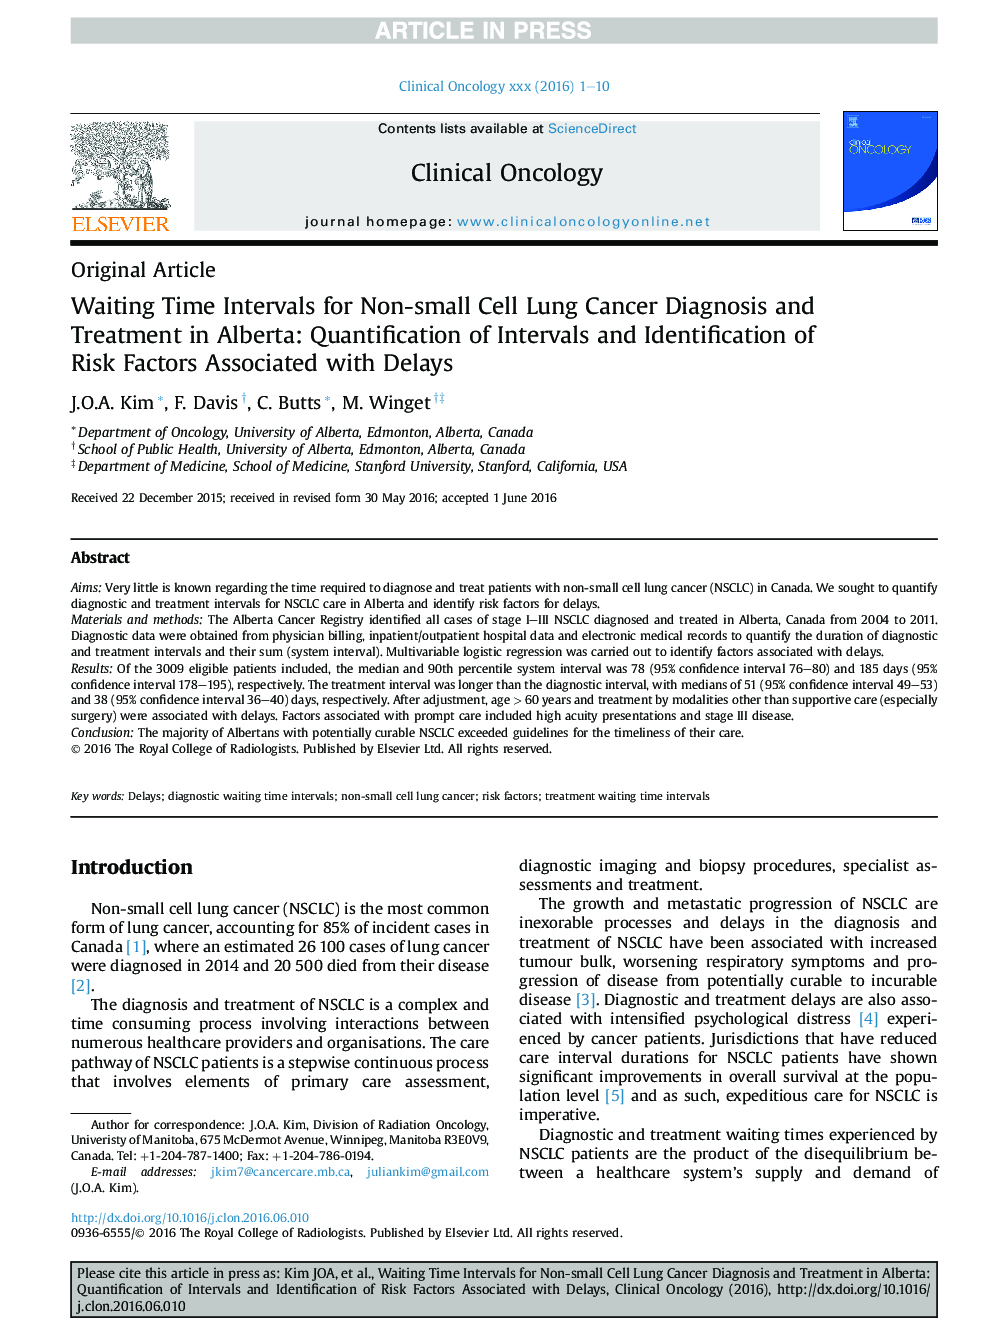 Waiting Time Intervals for Non-small Cell Lung Cancer Diagnosis and Treatment in Alberta: Quantification of Intervals and Identification of Risk Factors Associated with Delays